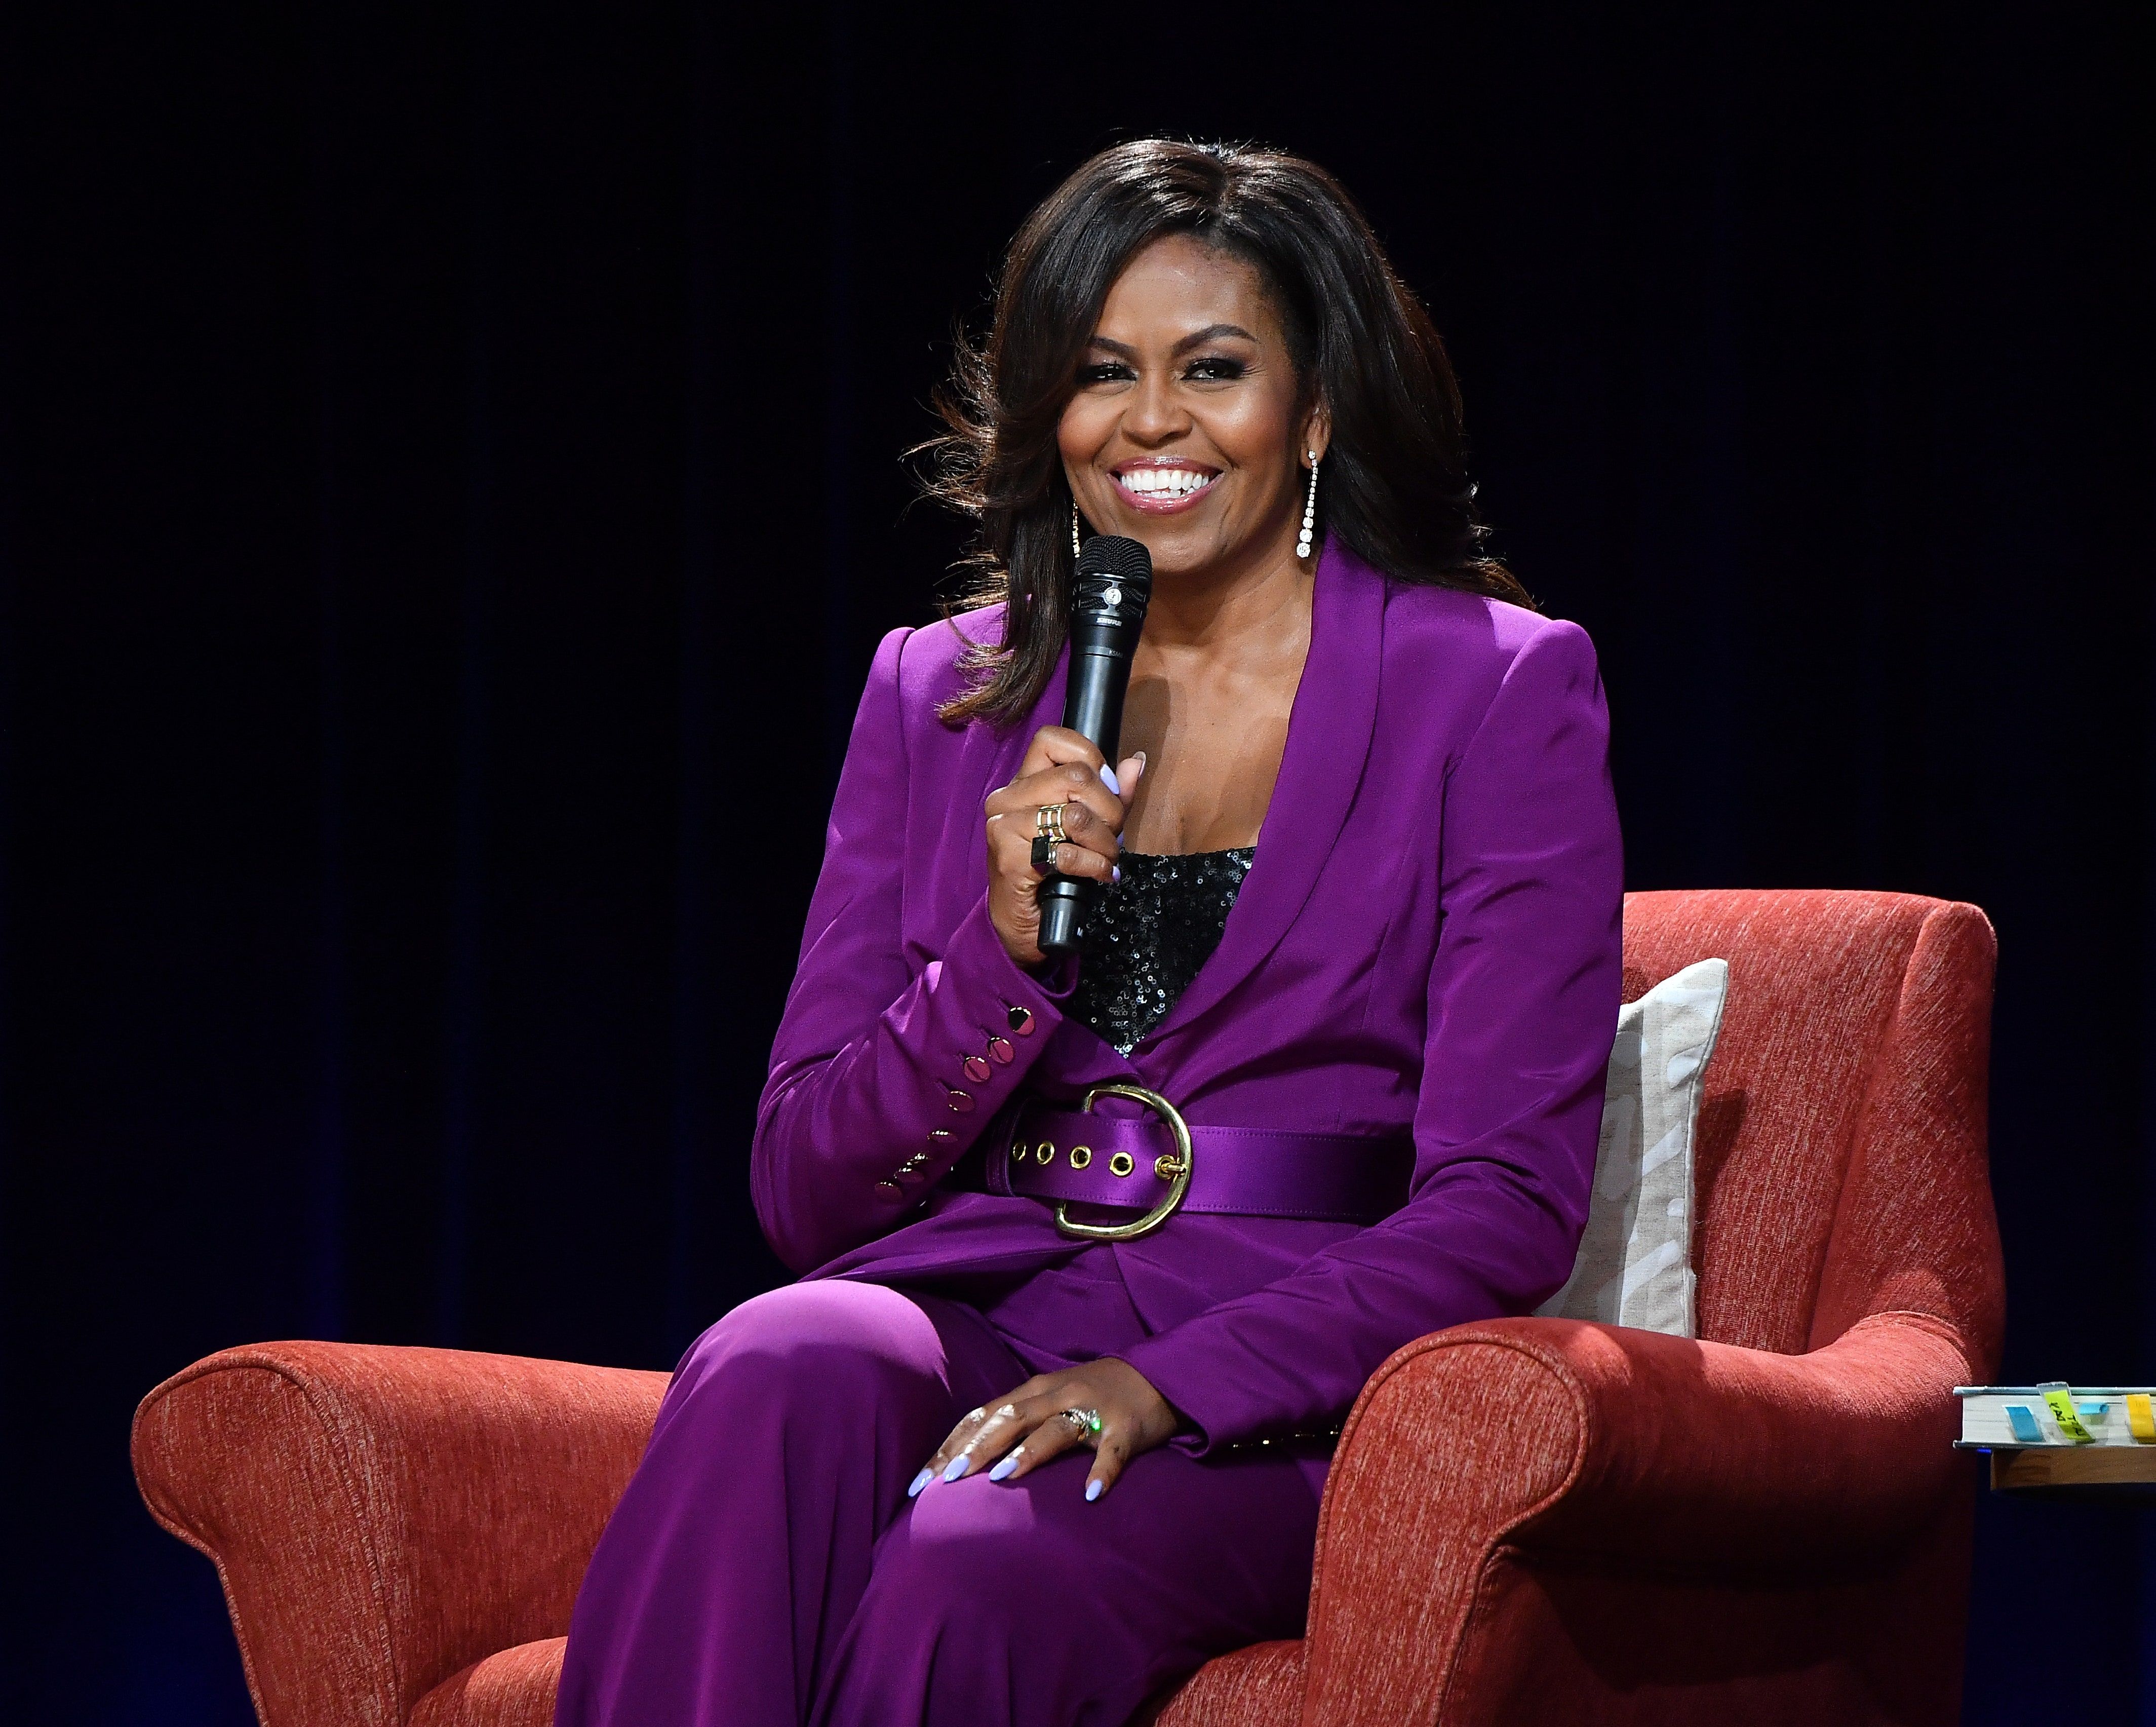 Michelle Obama's Series “A Year of Firsts” to Debut on IGTV in